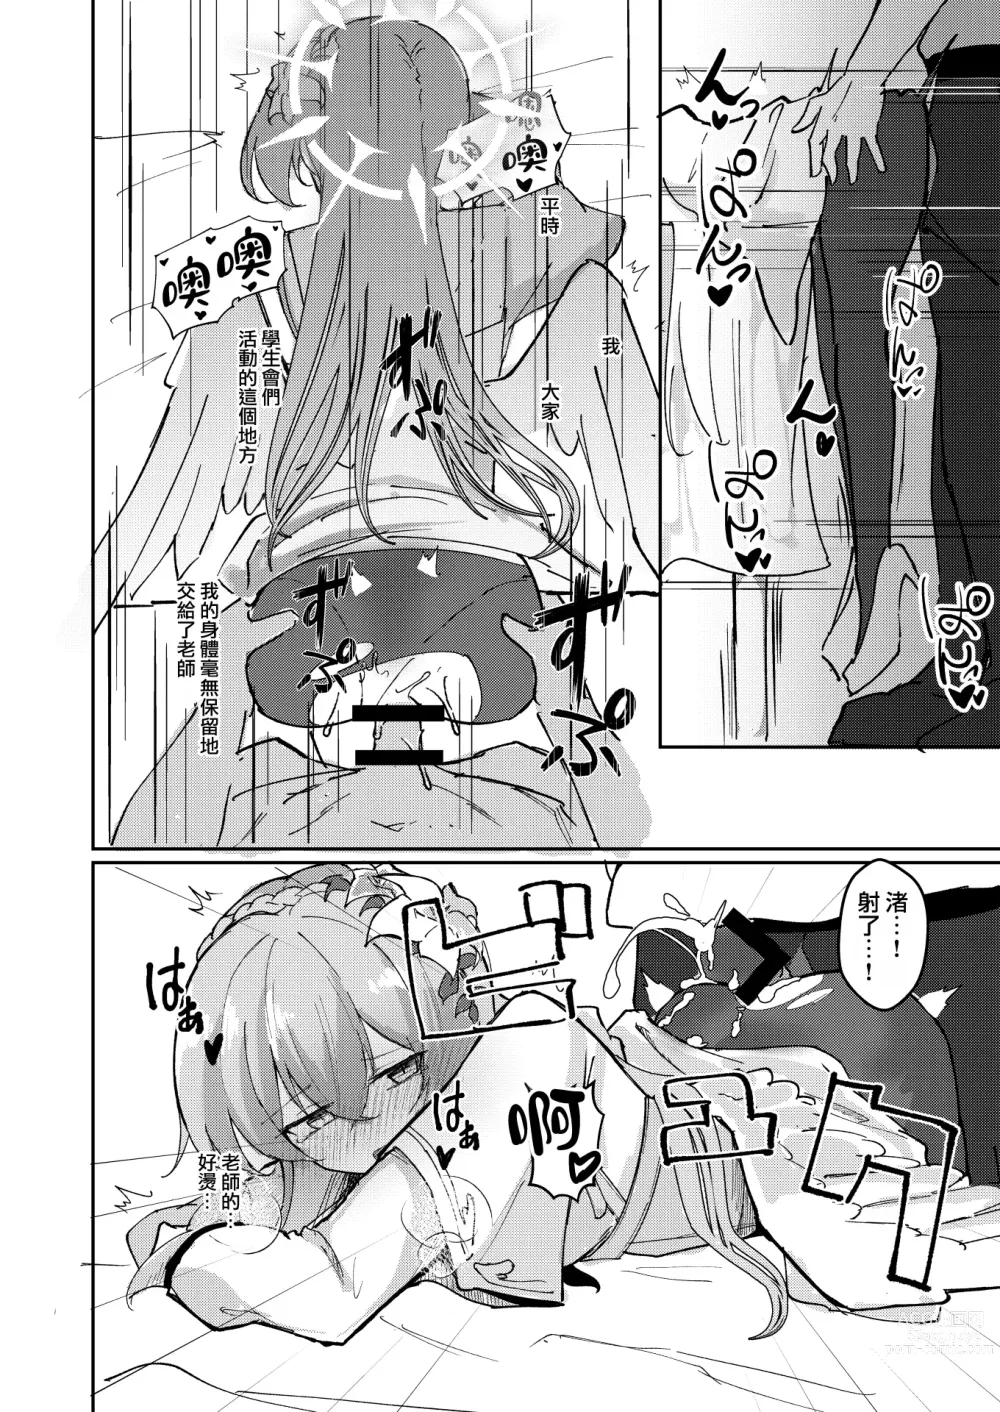 Page 13 of doujinshi 情欲羽翼下的學生會